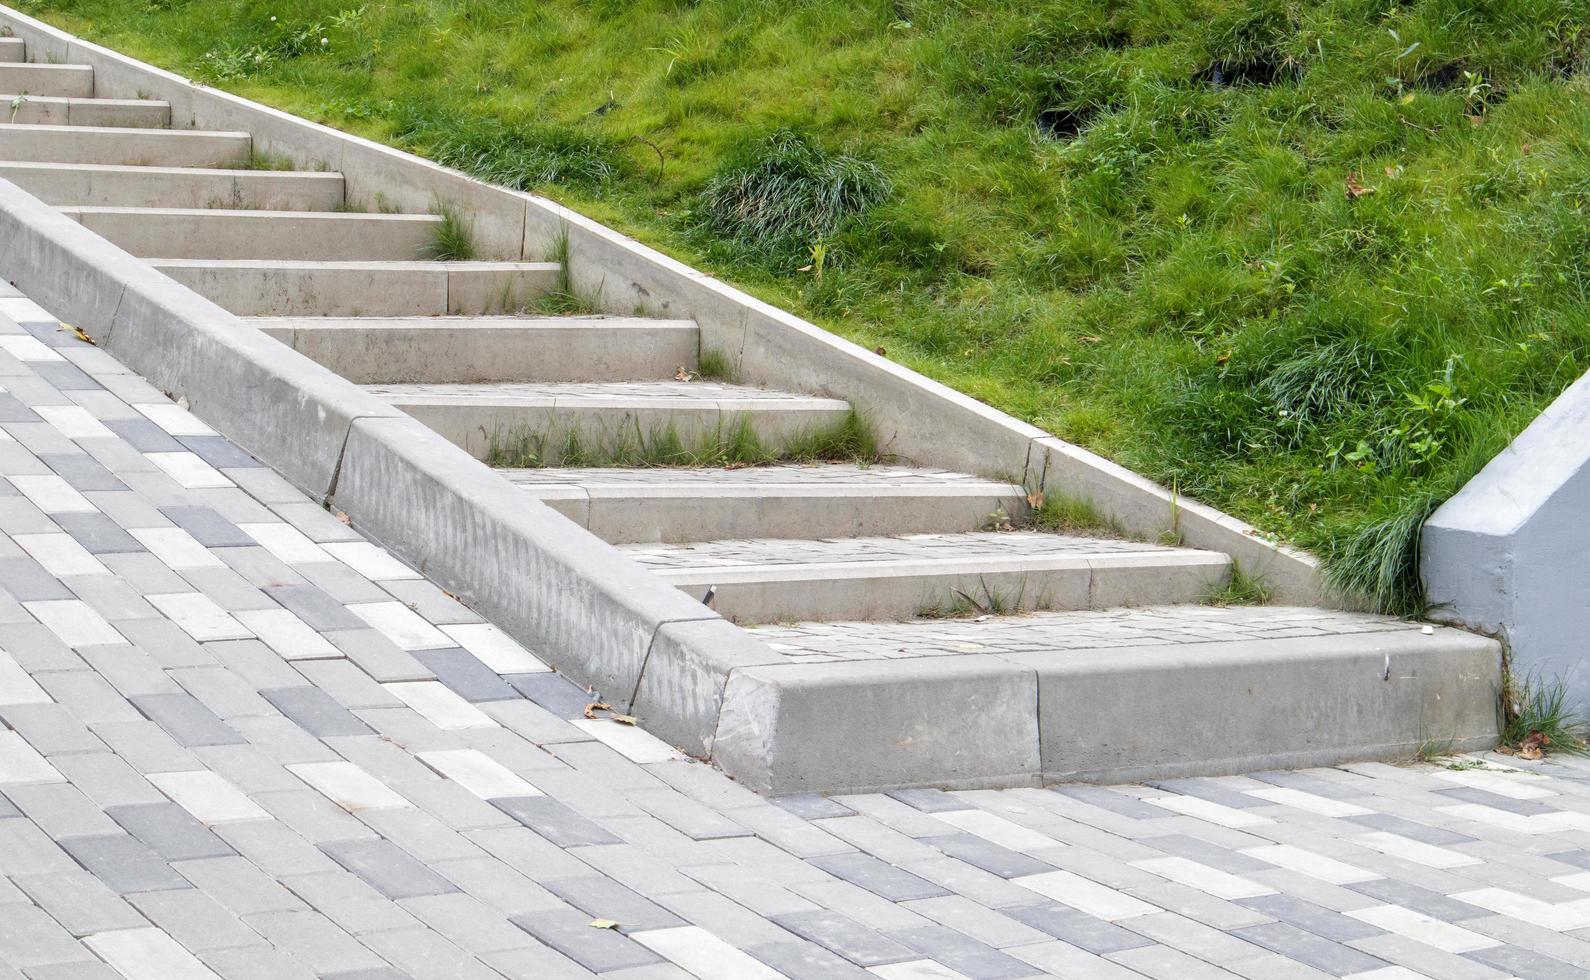 Steps from paving slabs and curbs. photo